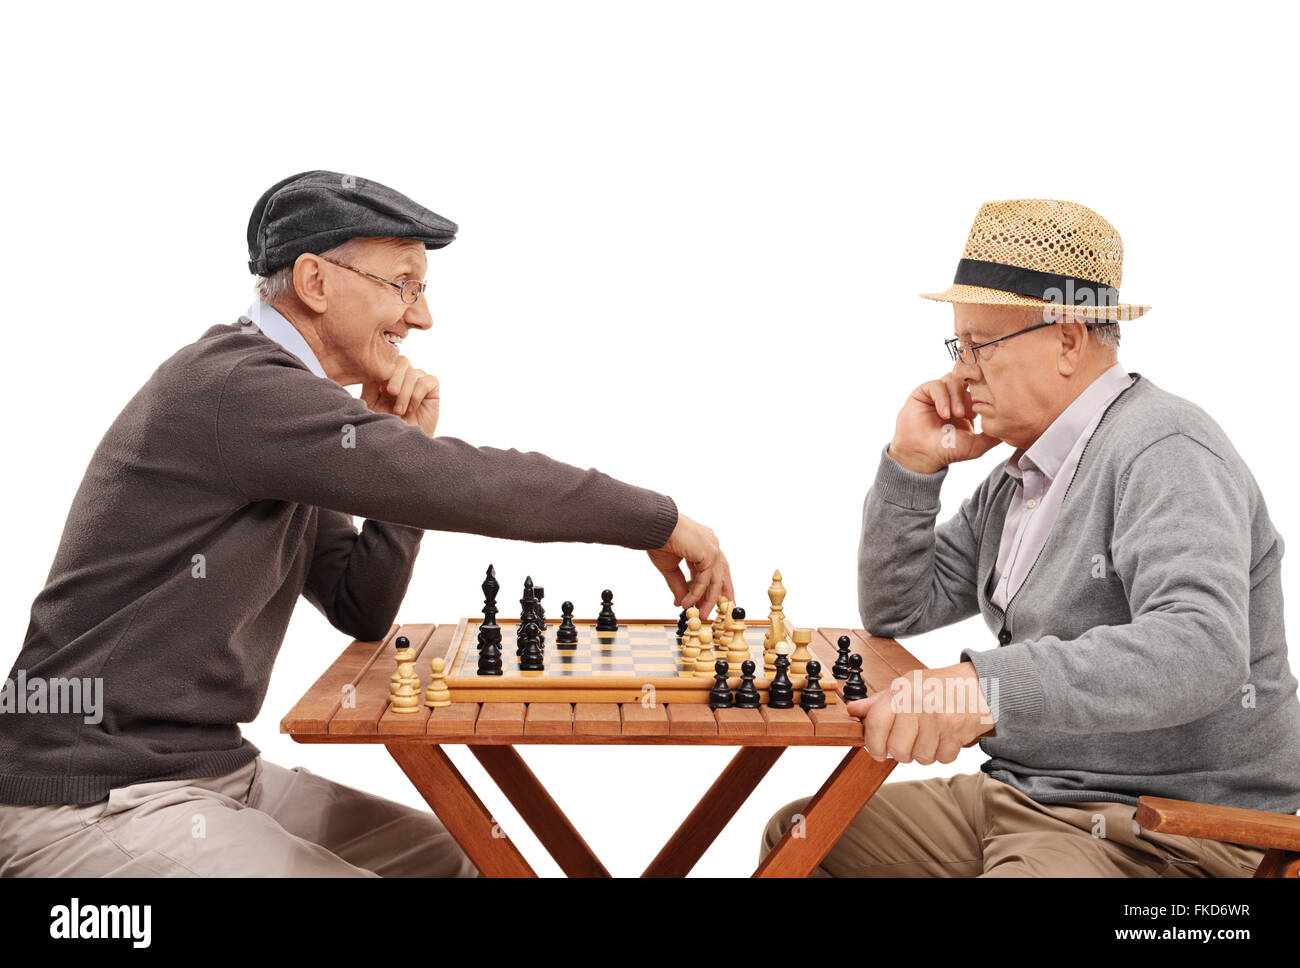 Studio shot of two old friends playing a game of chess at a wooden table isolated on white background Stock Photo